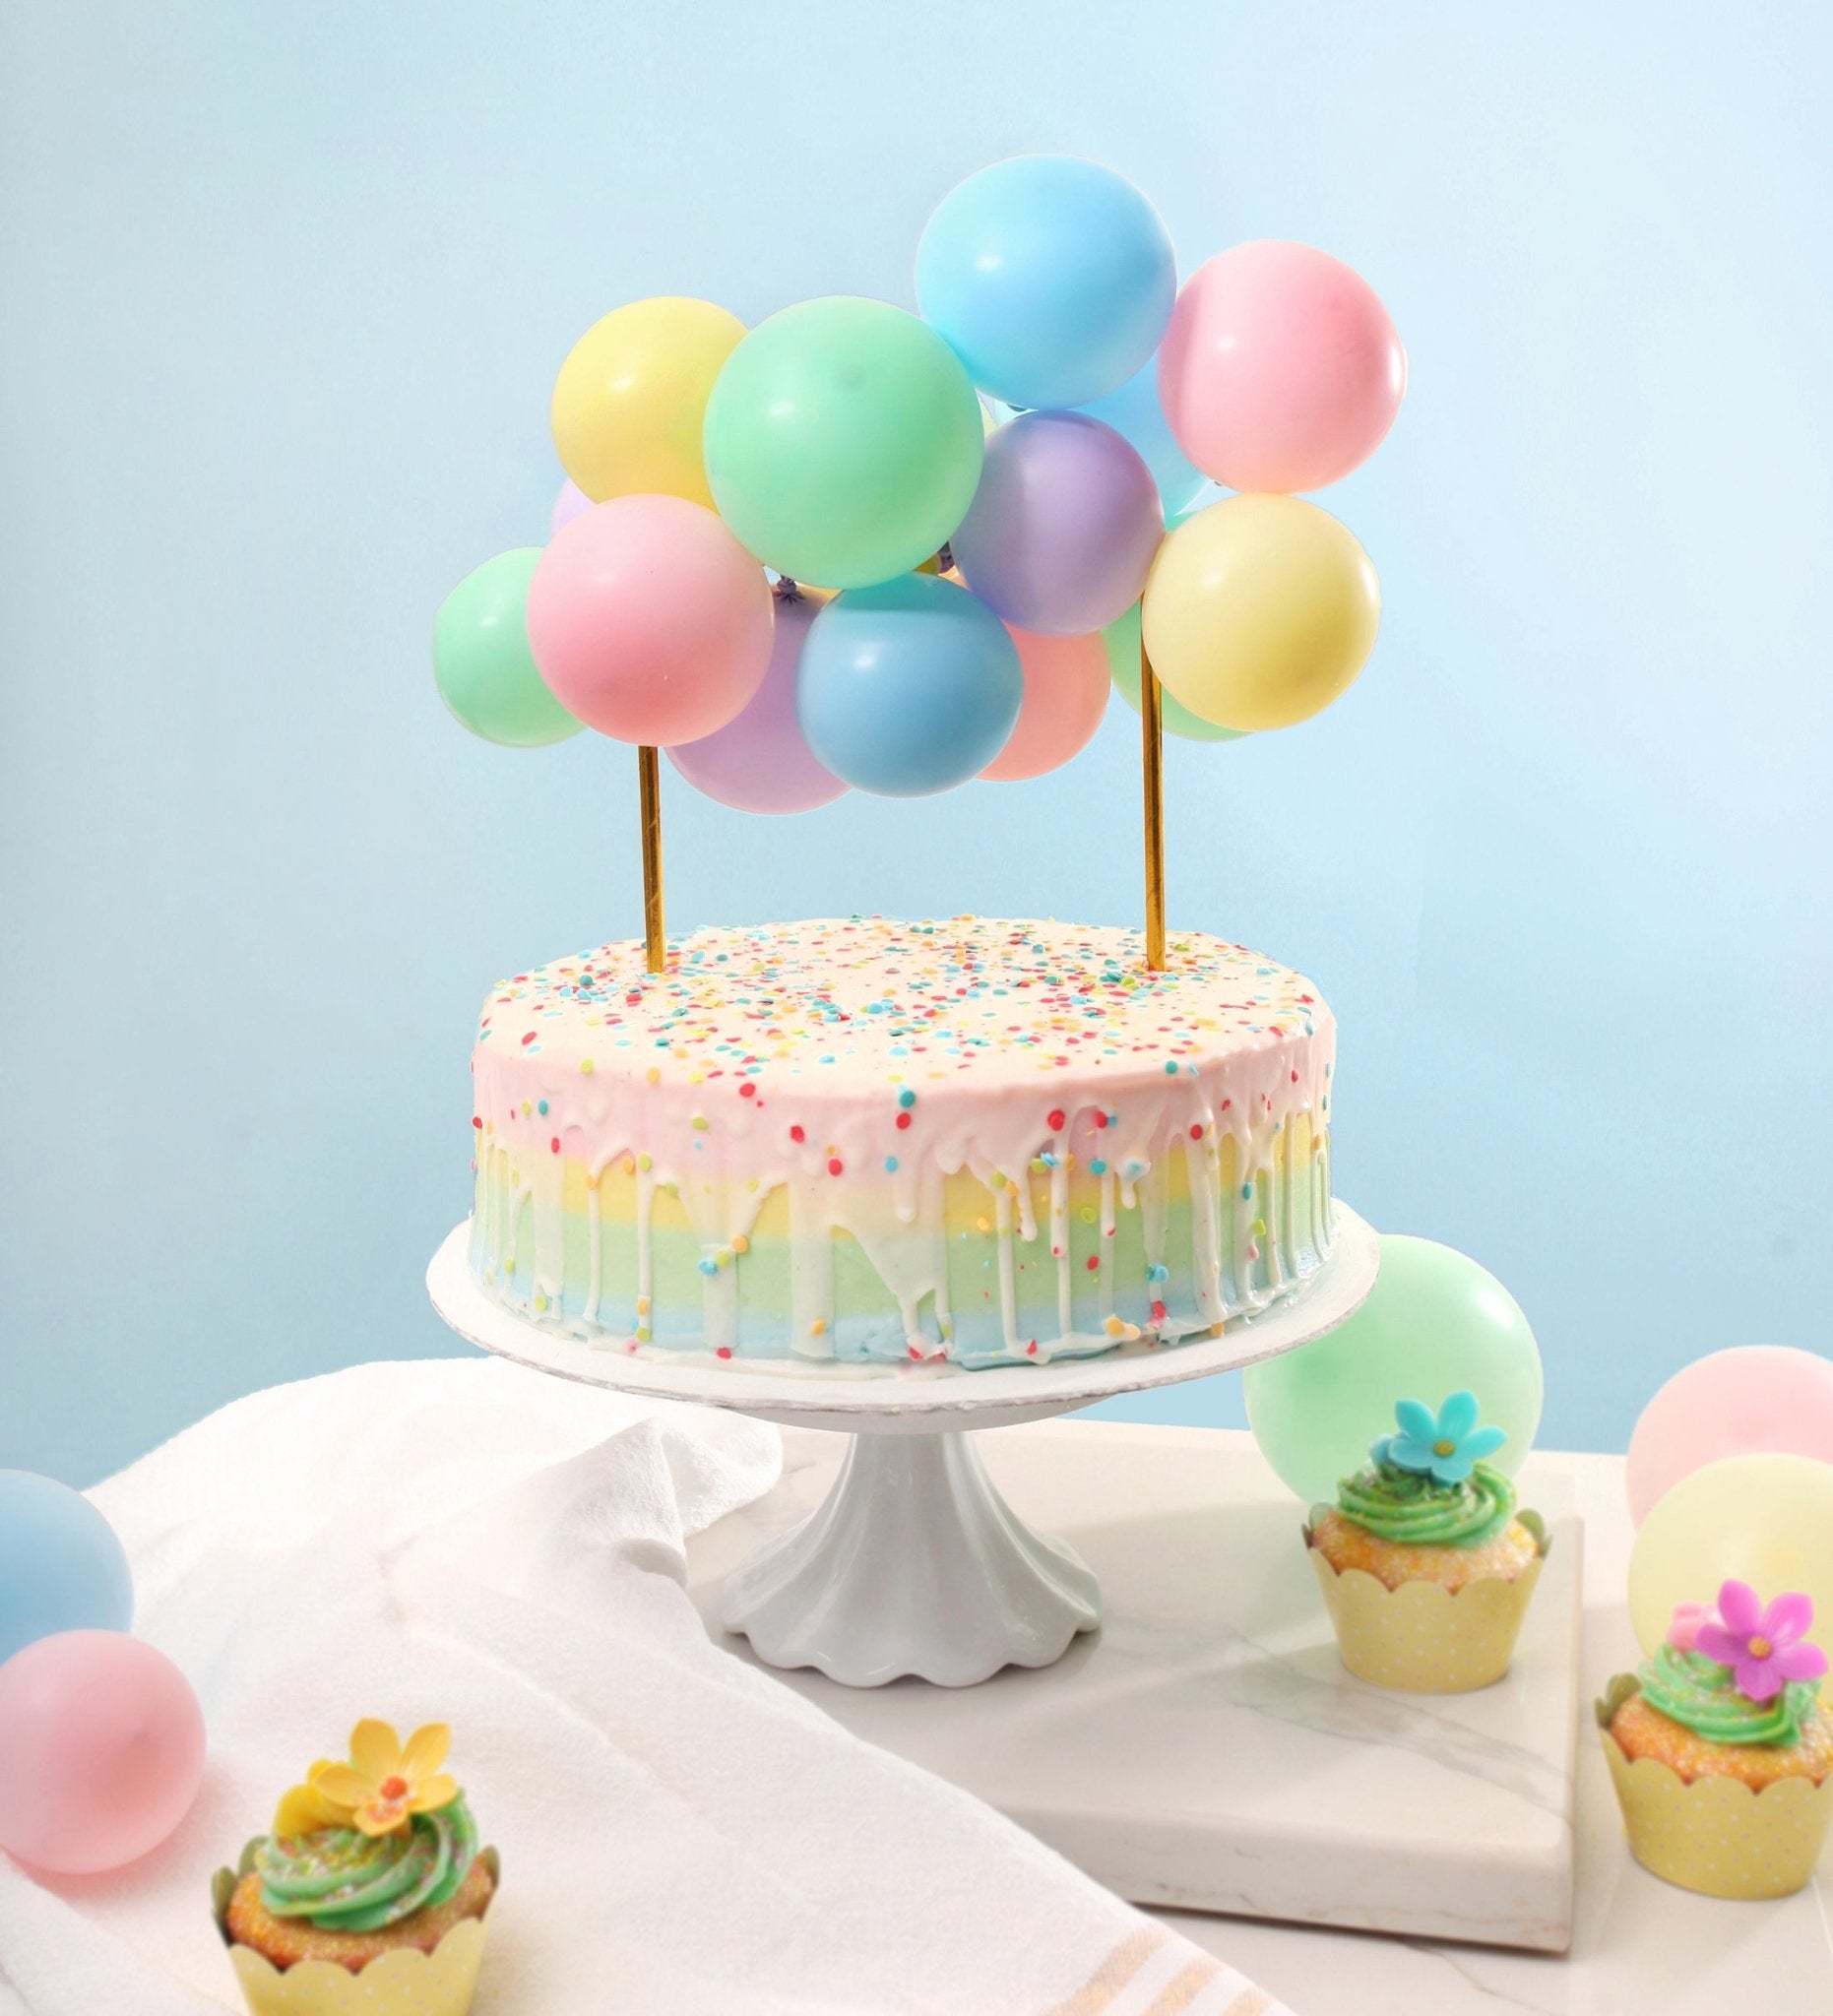 Rainbow Birthday Party in pastel colors - My Party Design